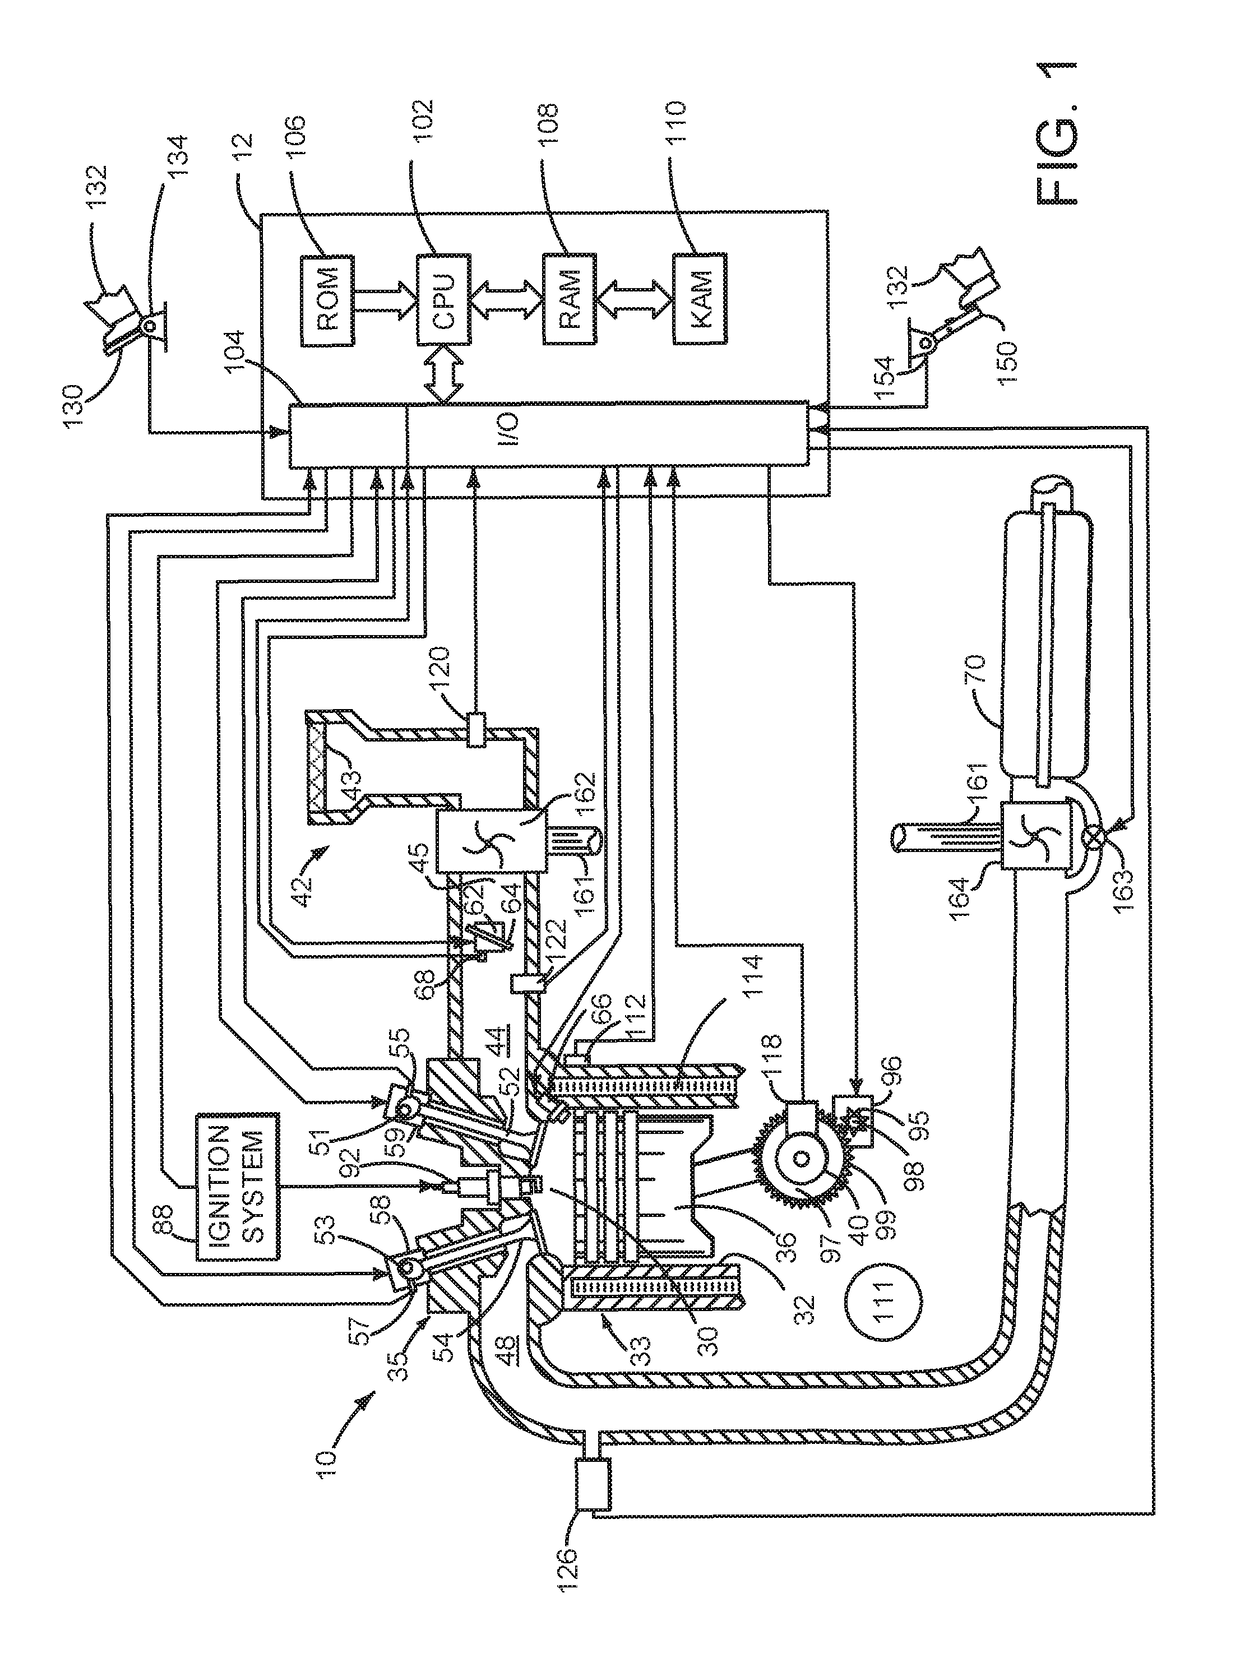 System and method for diagnosing a variable displacement engine